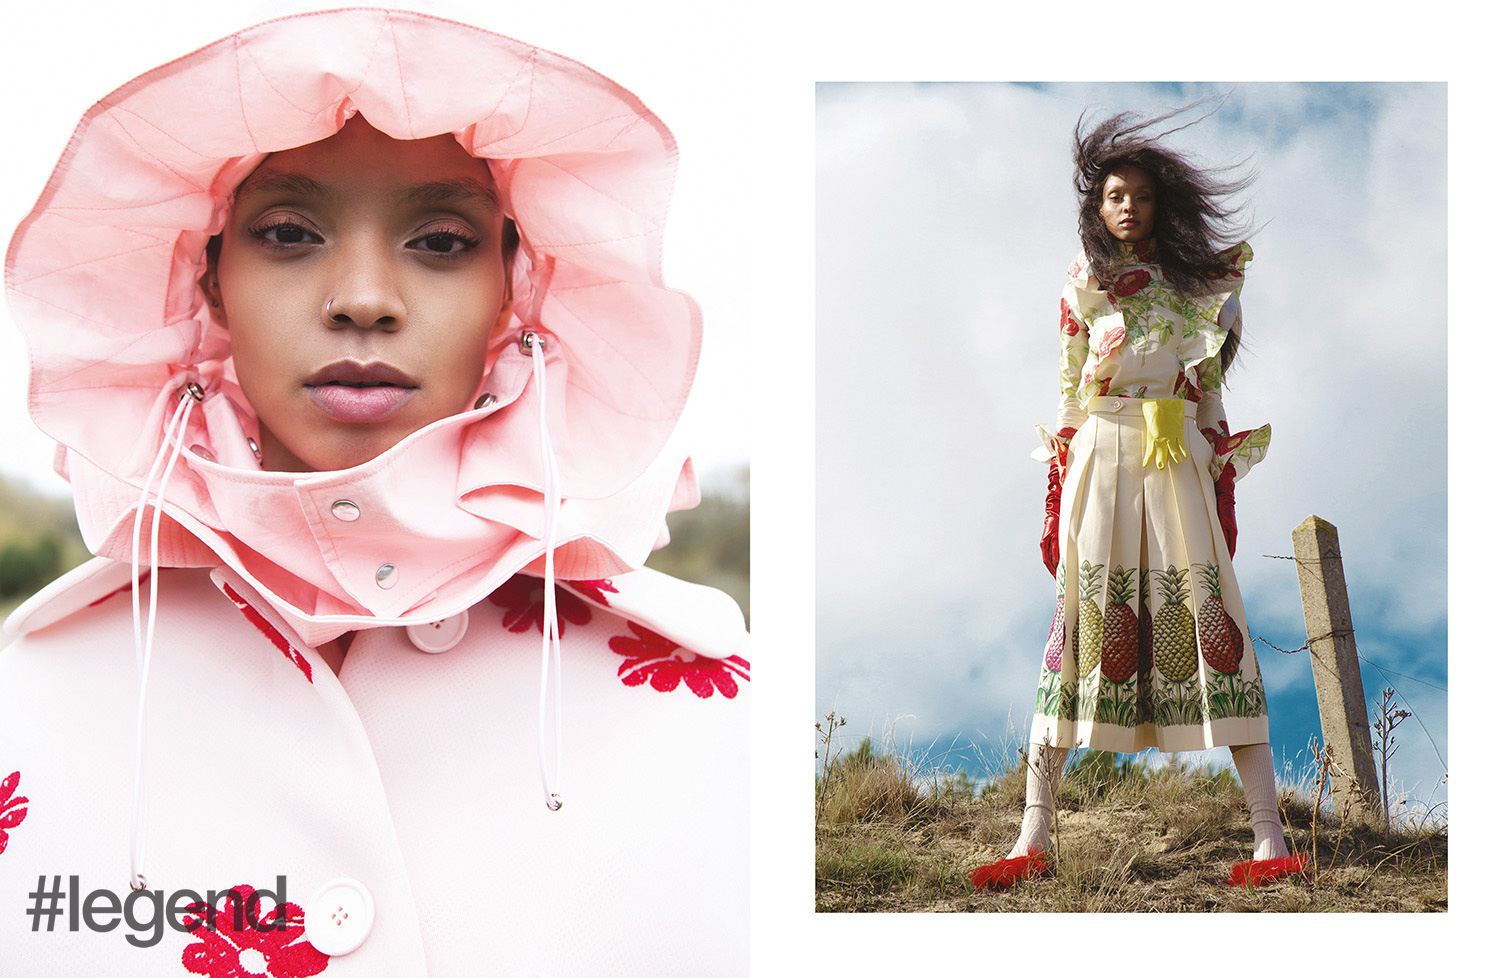 LEFT: Hat _ Angel Chen | Coat _ Simone Rocha; RIGHT: Top and skirt _ Gucci | Gloves, socks and shoes _ Stylist’s own